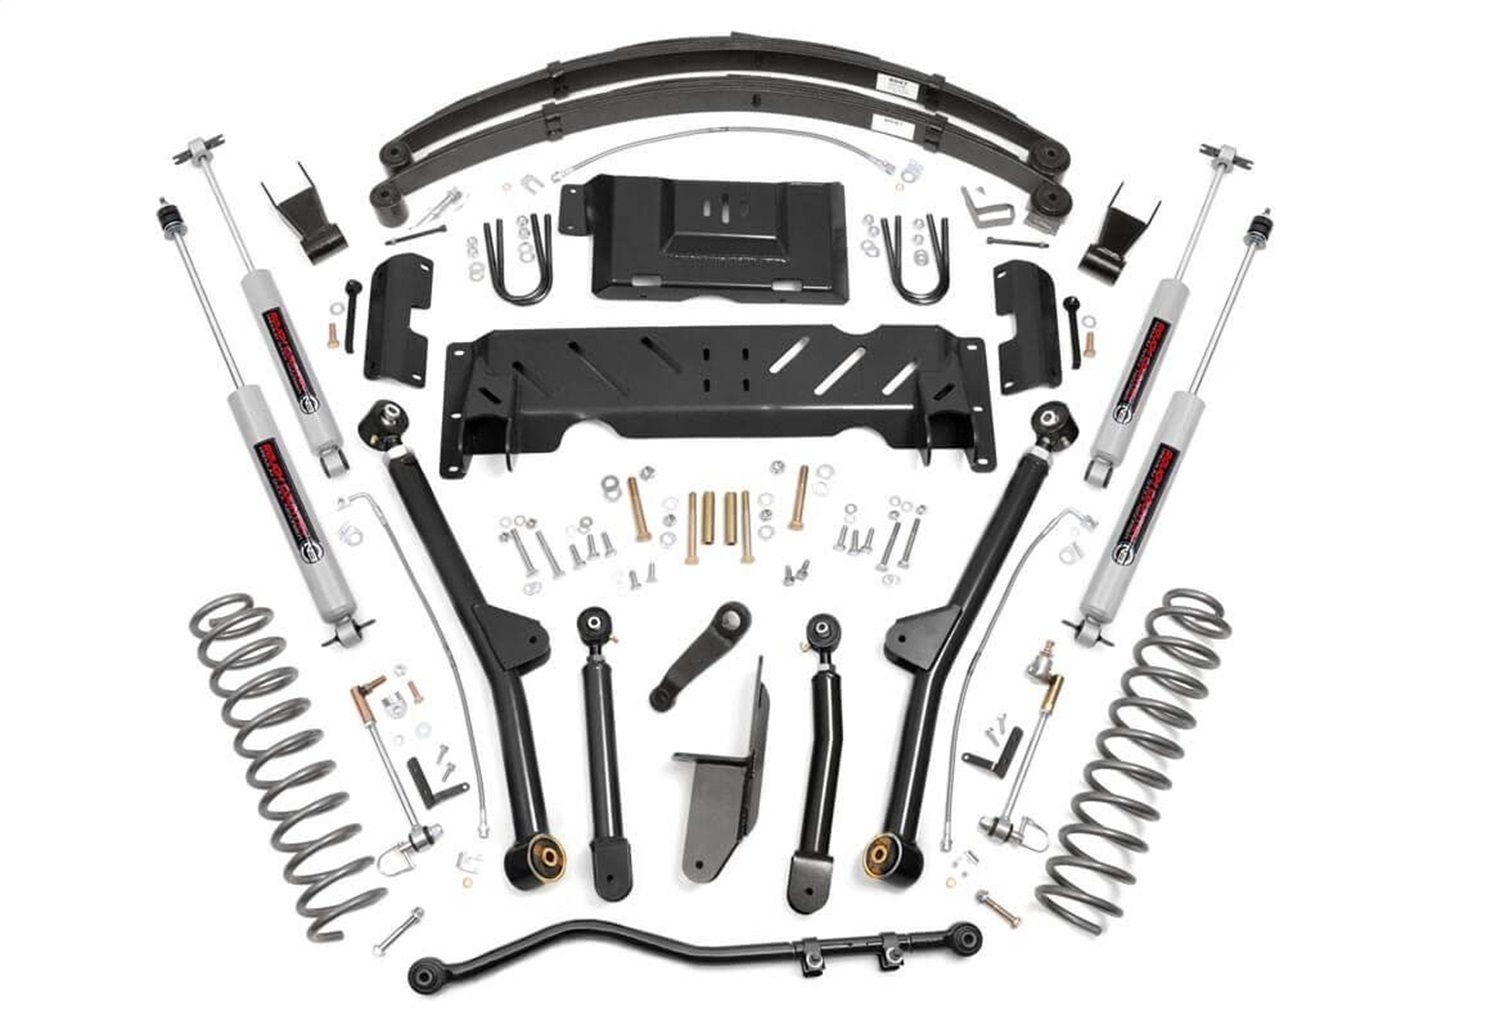 61822 6.5-inch X-Series Long Arm Suspension Lift System